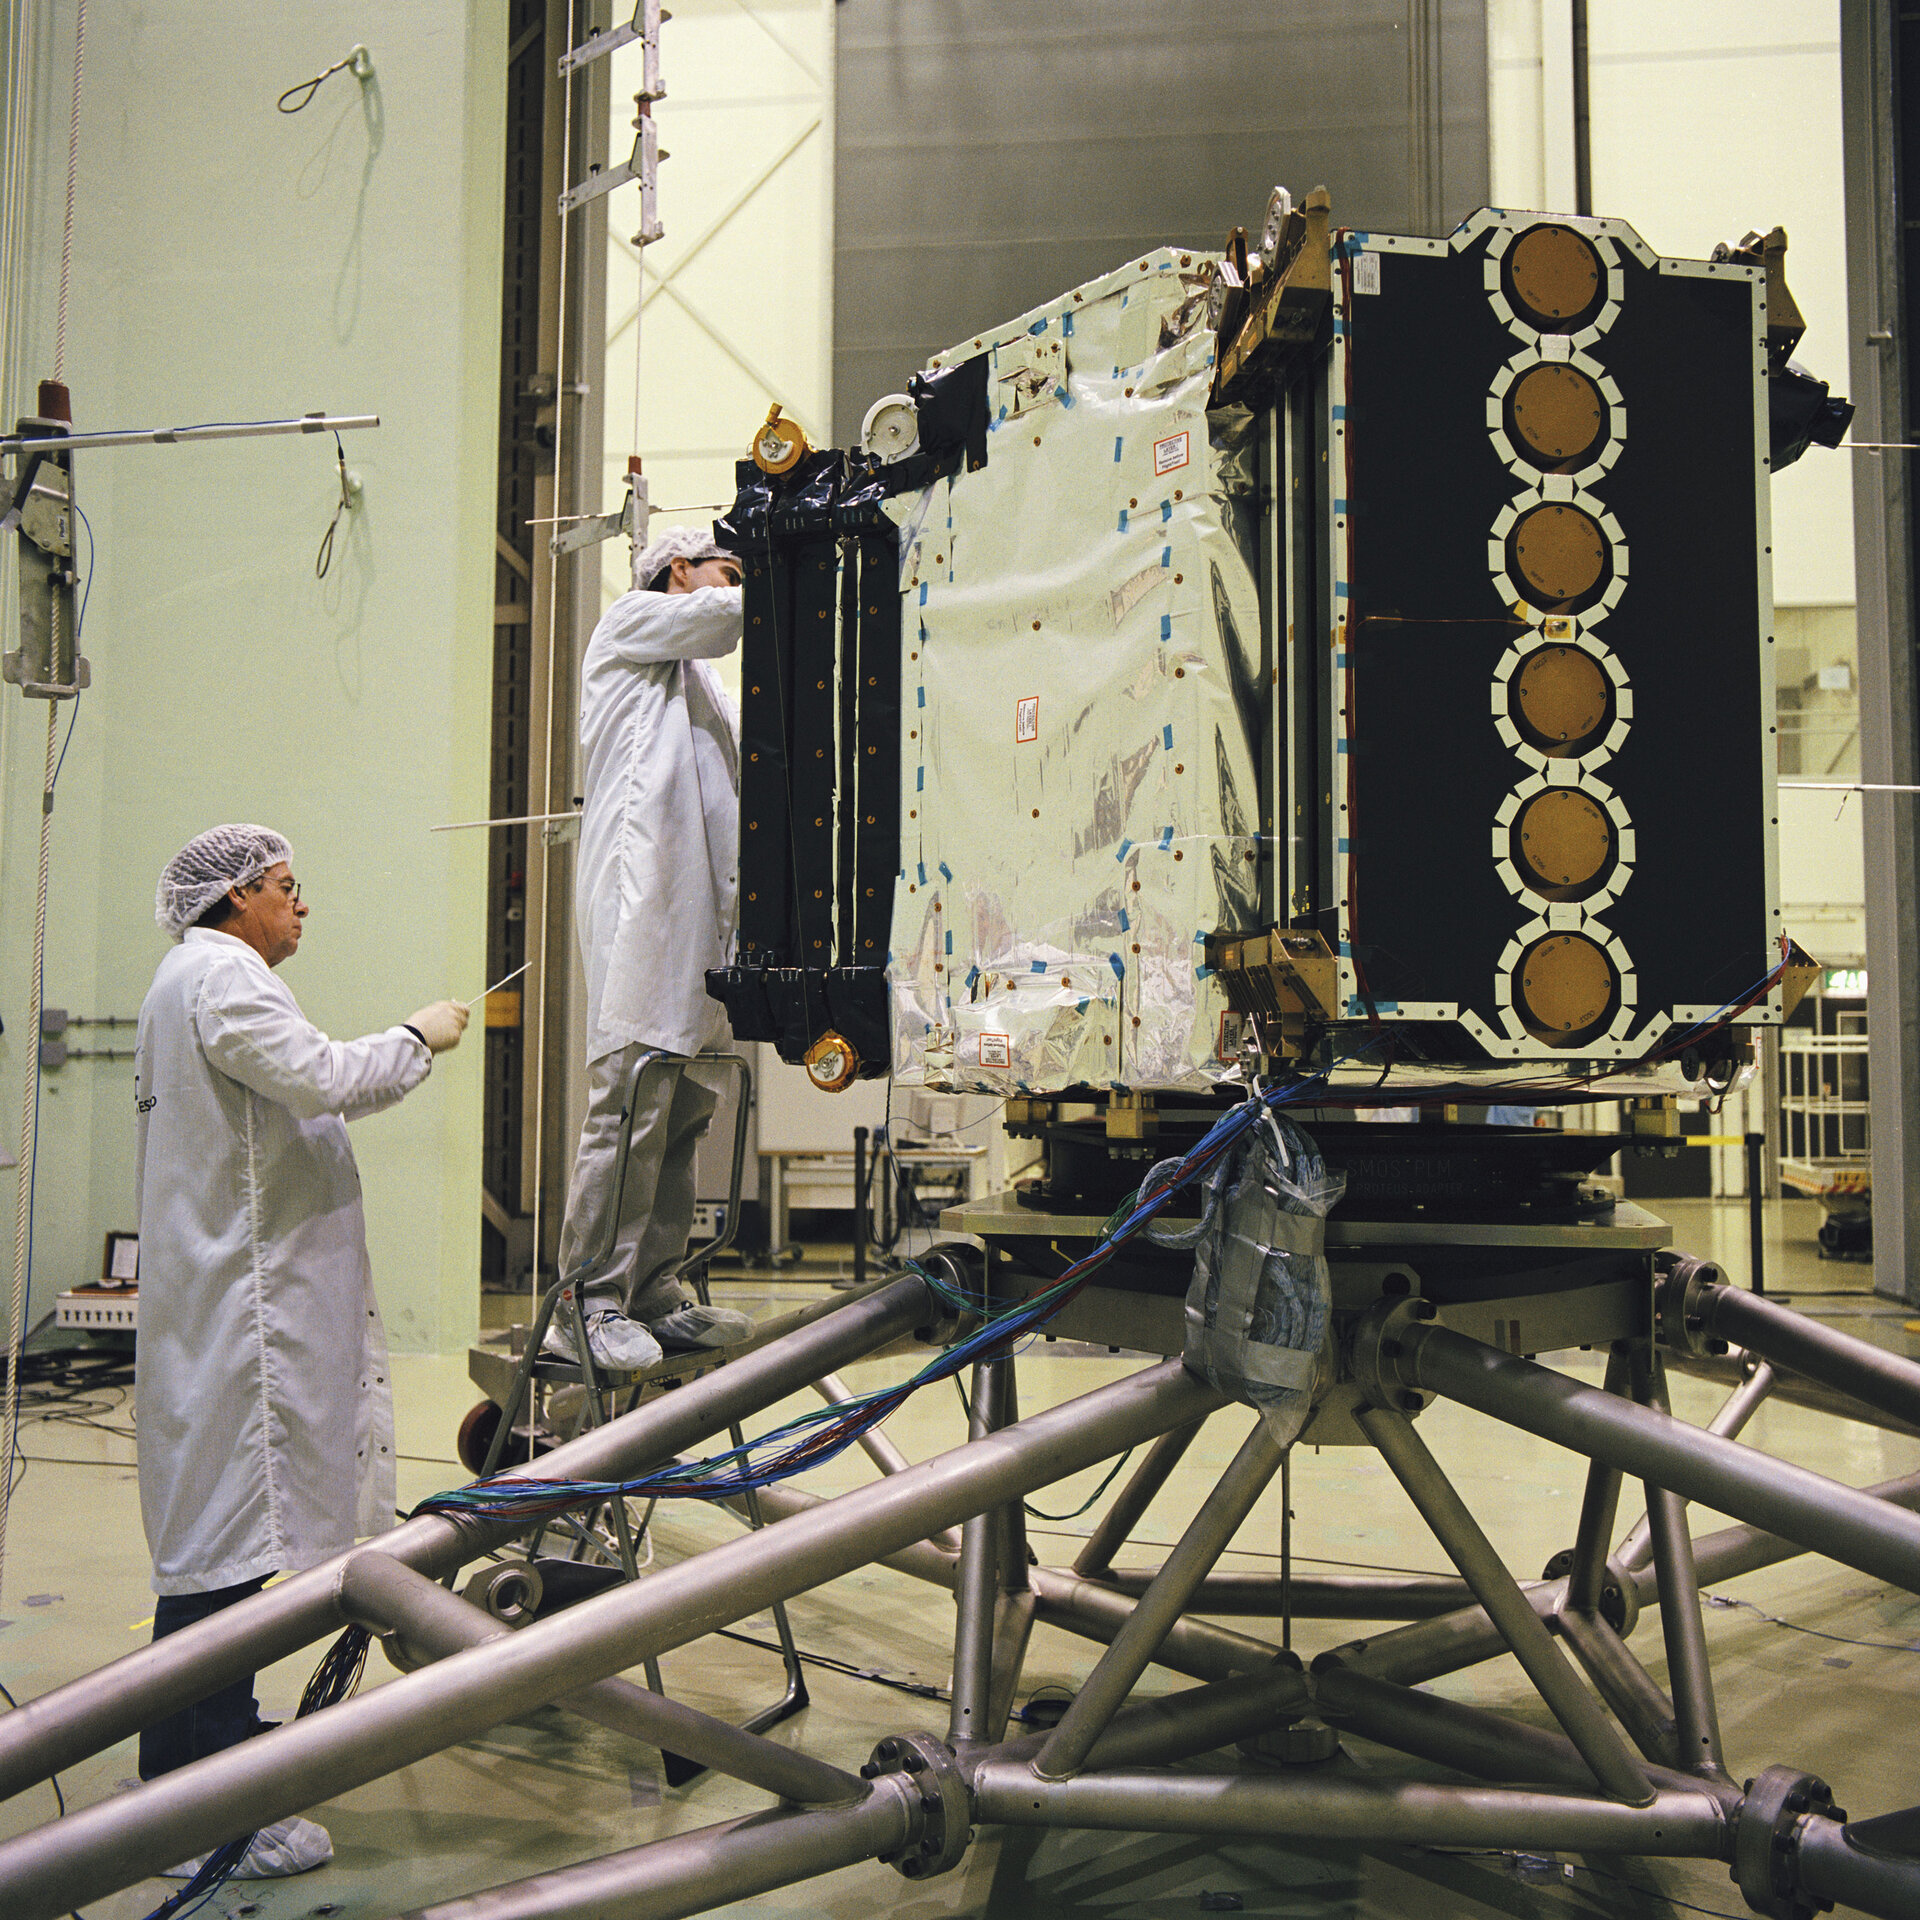 SMOS being prepared for testing